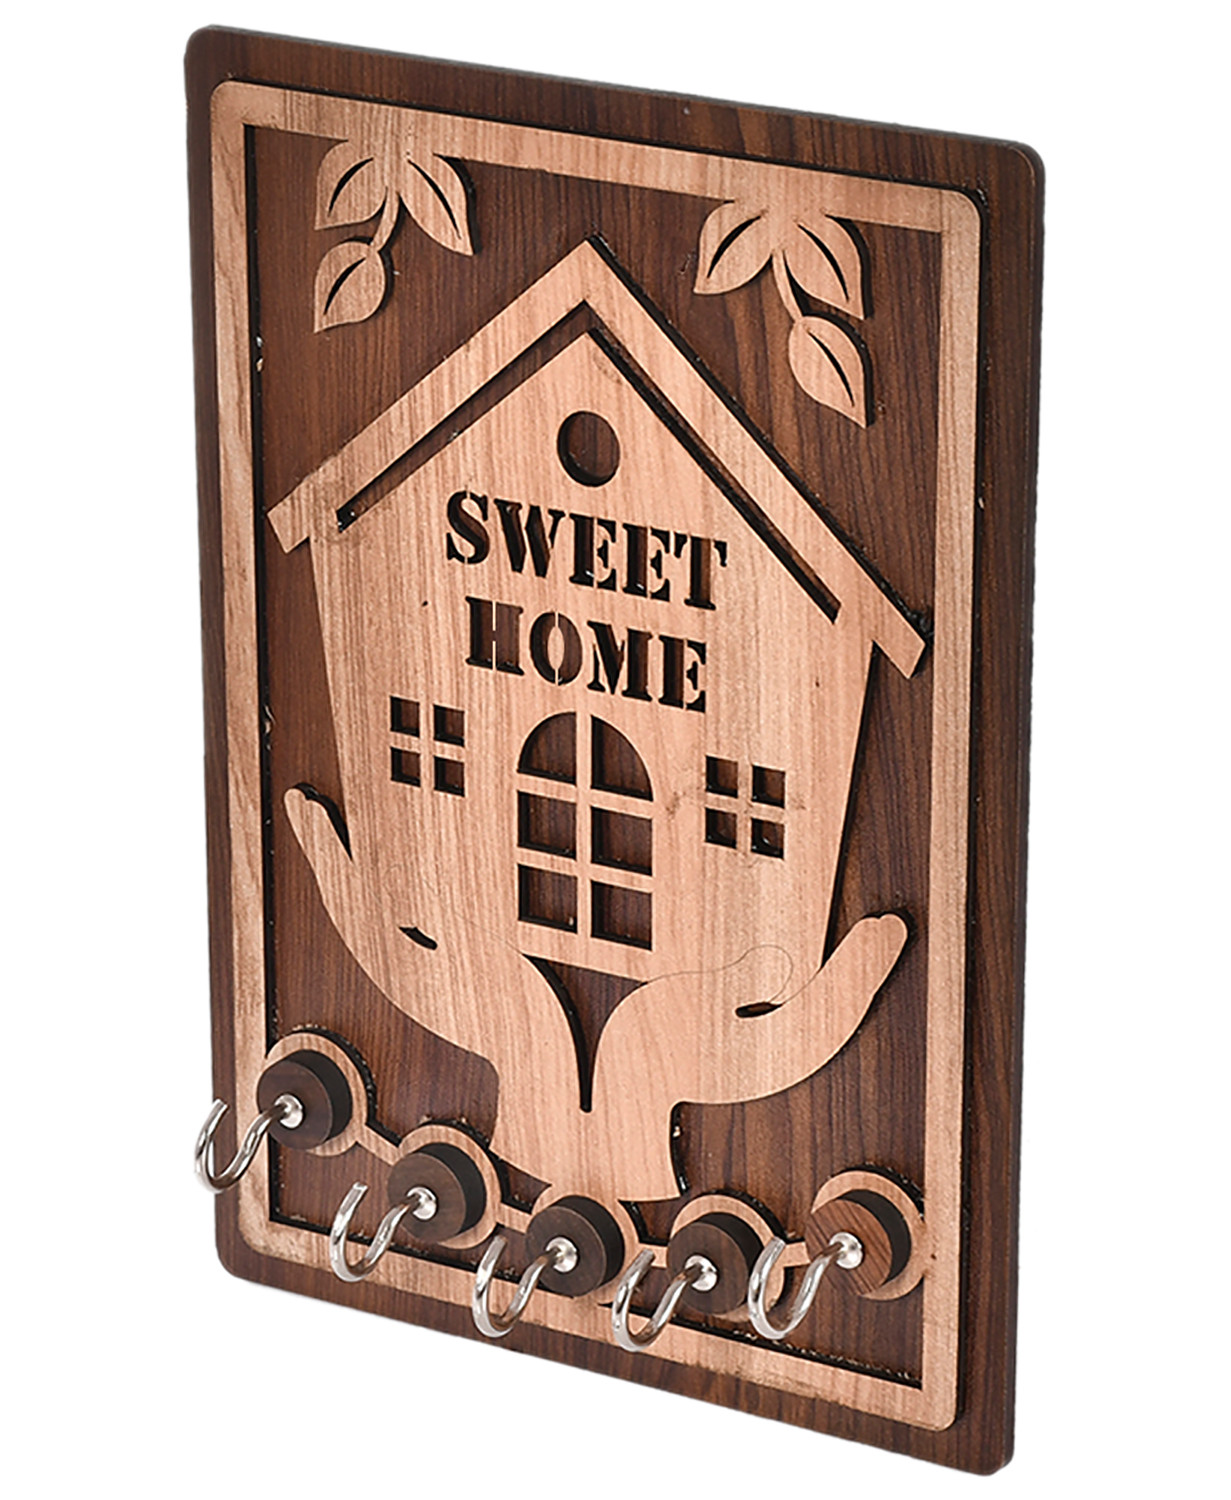 Kuber Industries Sweet Home Design Wooden Wall Key Holder With 5 Hooks (Brown)-45KM053